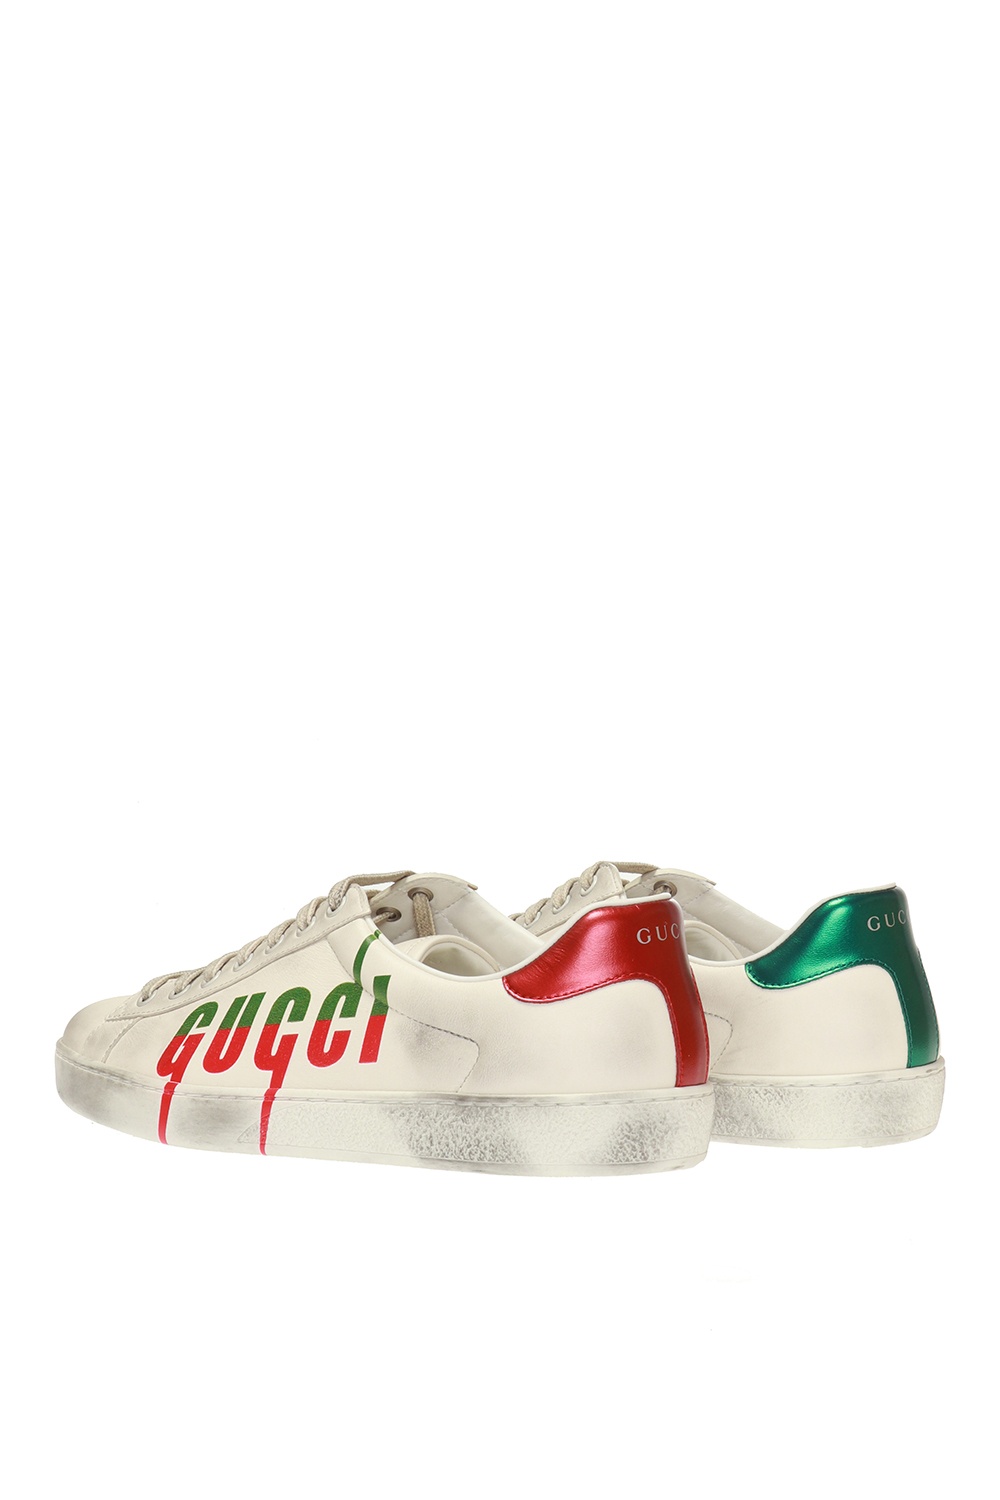 Gucci 3 Pcs New White Set – Bag, Sneakers and Wallet – peehe